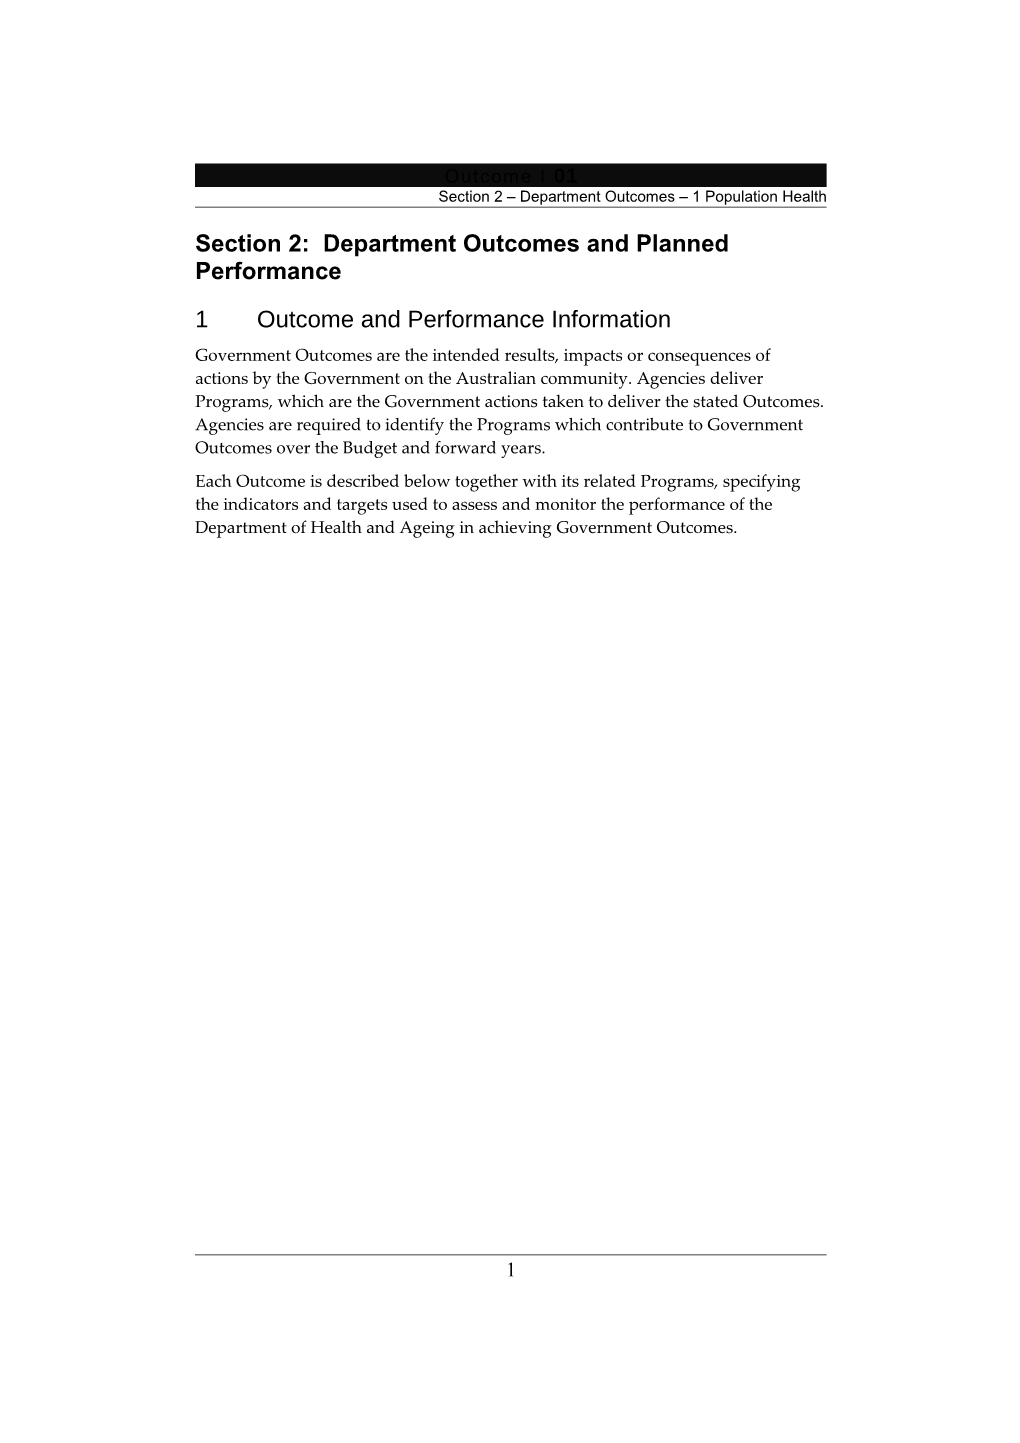 Section 2: Department Outcomes and Planned Performance